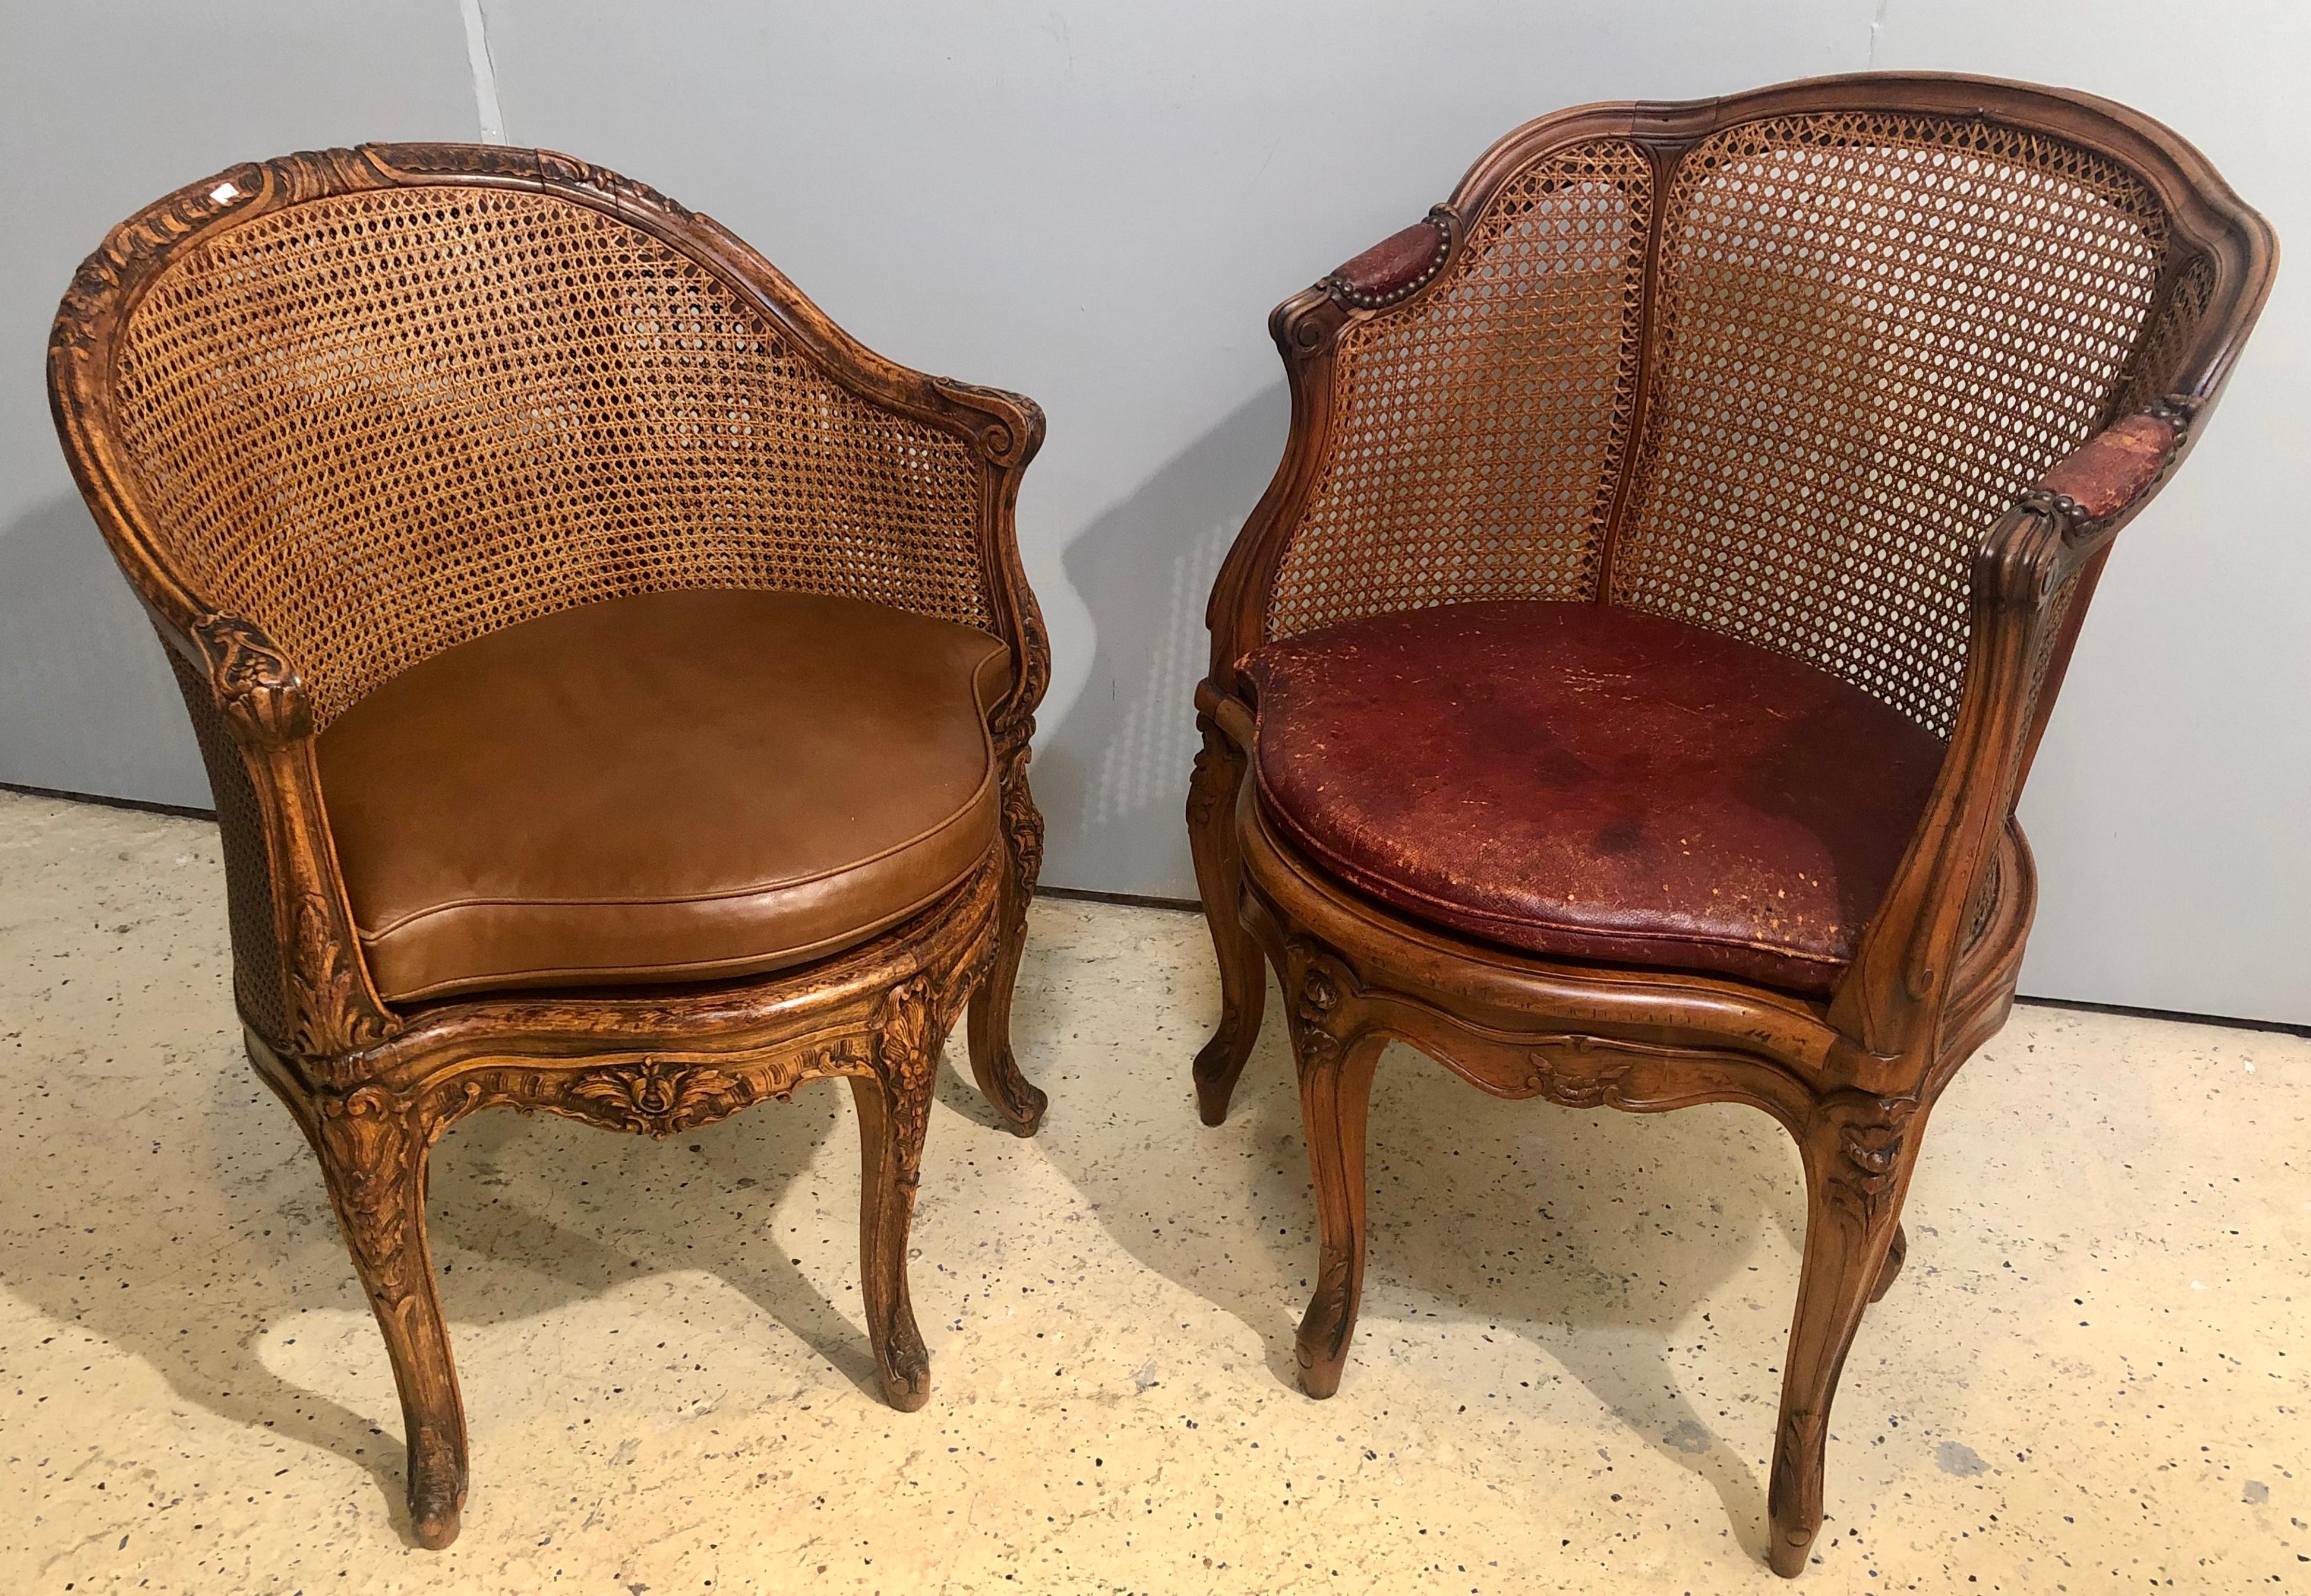 18th century French Caned Bergere de Bureau. A comparable pair of Bergeres. A Louie XV Beechwood Bergere de Bureau With leather squab cushion, circa 1740. The two magnificently carved. Can purchase one if only one is desired. 

Please see: 
Sale